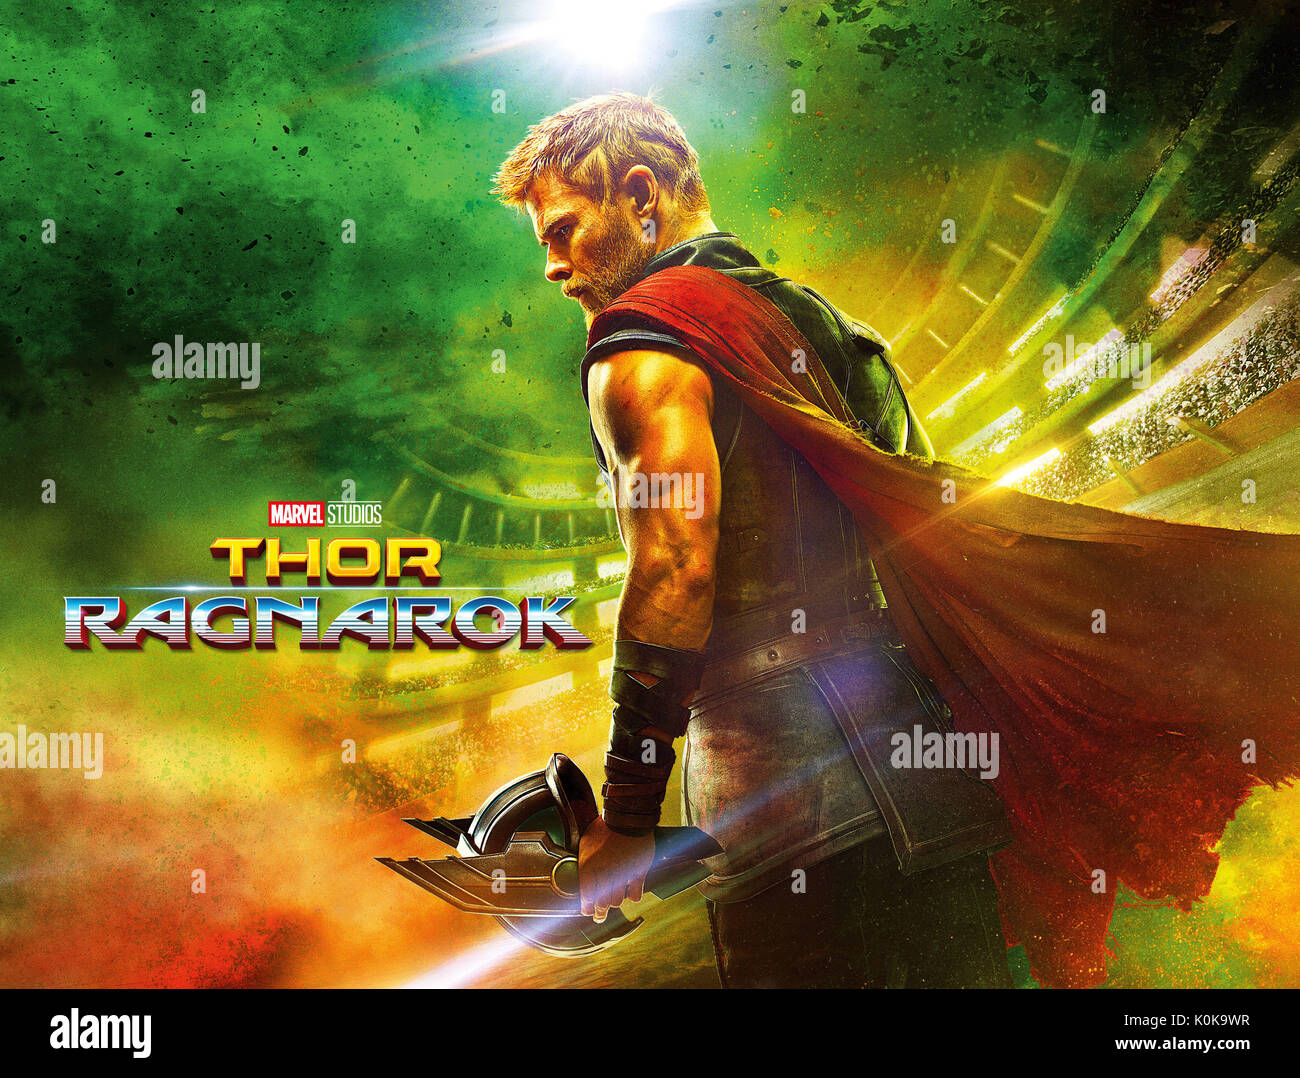 RELEASE DATE: November 3, 2017 TITLE: Thor: Ragnarok STUDIO: Marvel DIRECTOR: Taika Waititi PLOT: Thor must face the Hulk in a gladiator match and save his people from the ruthless Hela STARRING: CHRIS HEMSWORTH as Thor Poster art. (Credit: Marvel/Entertainment Pictures Stock Photo